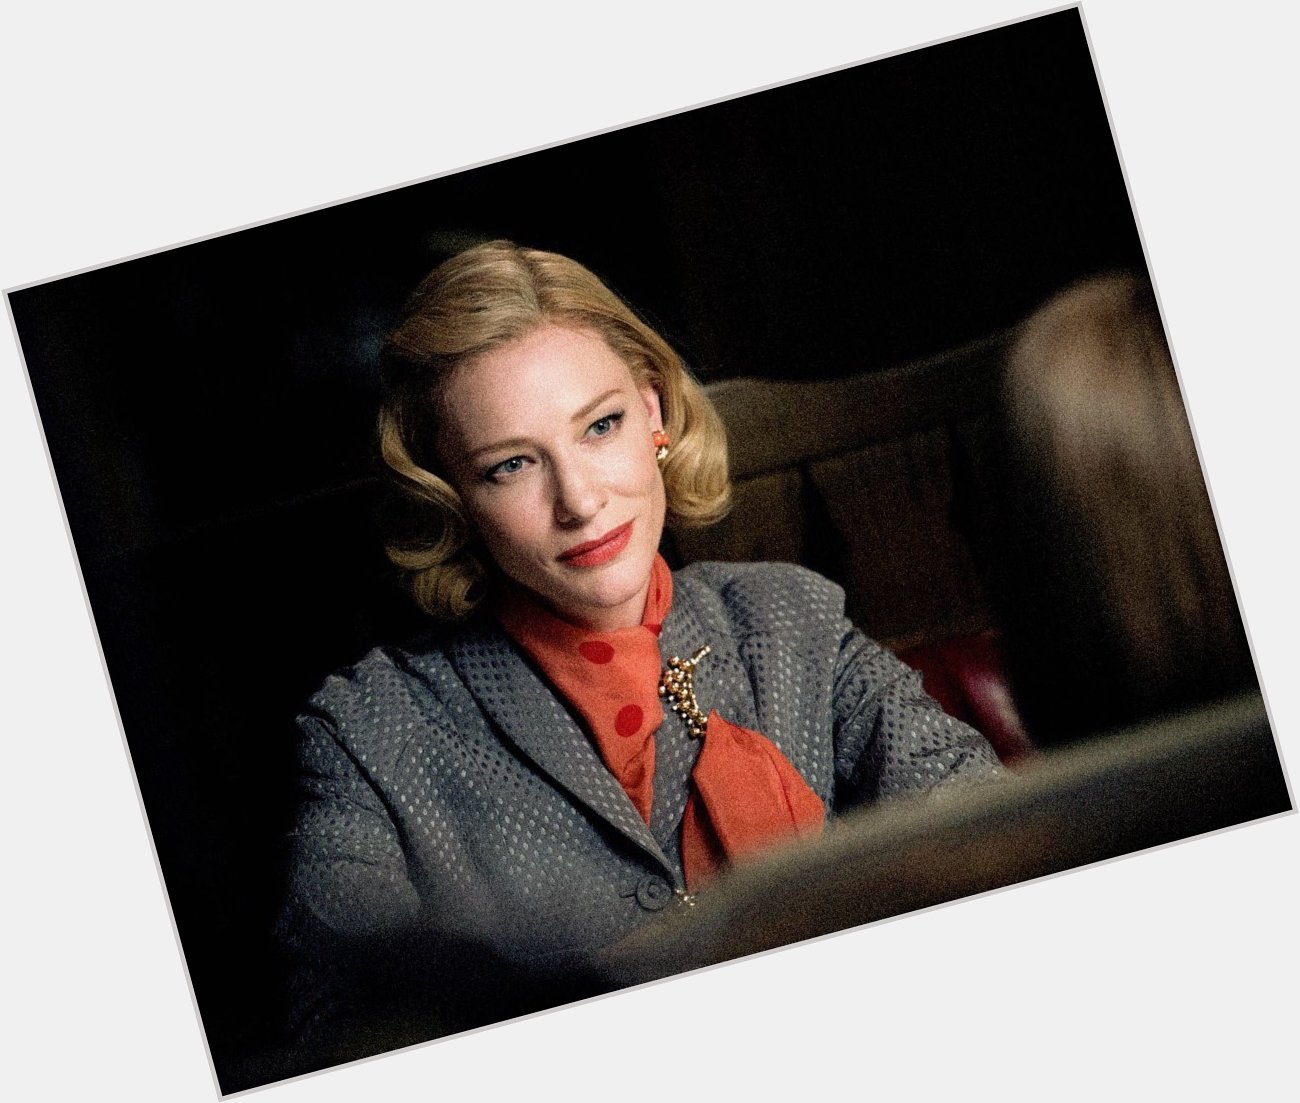 Happy birthday to one of my favorite actresses ever, the extraordinarily talented Cate Blanchett 